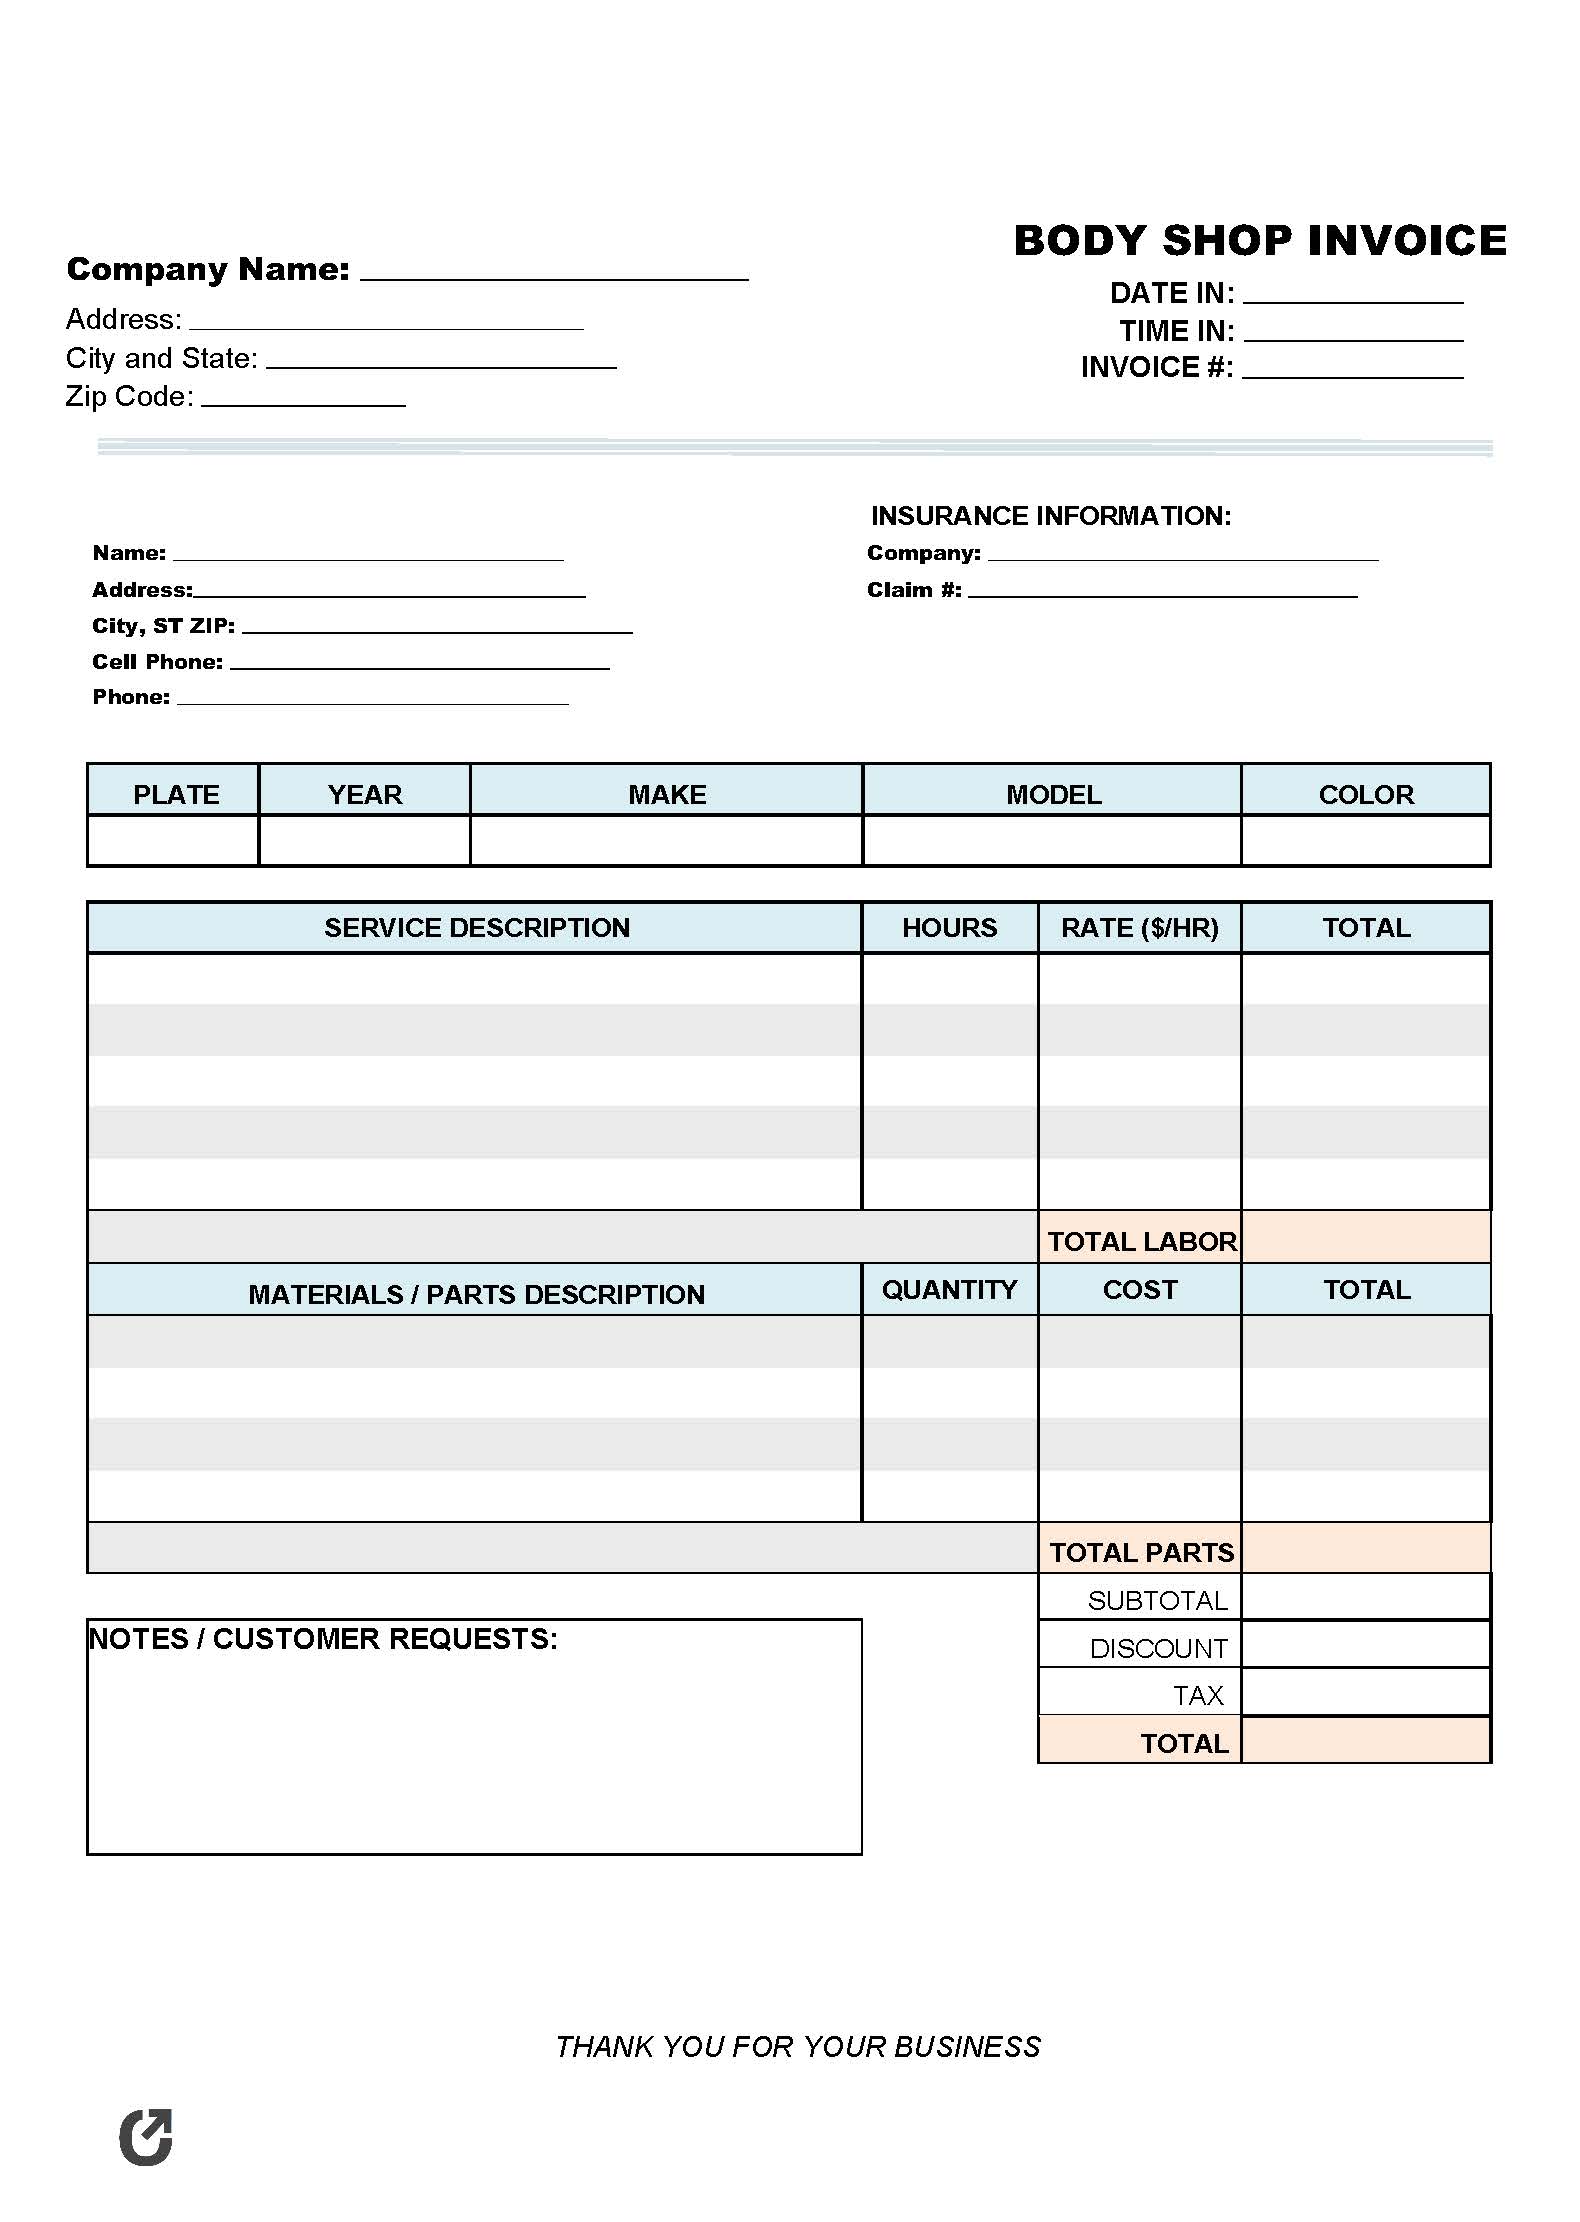 Free Body Shop Invoice Template  PDF  WORD  EXCEL Within Car Service Invoice Template Free Download